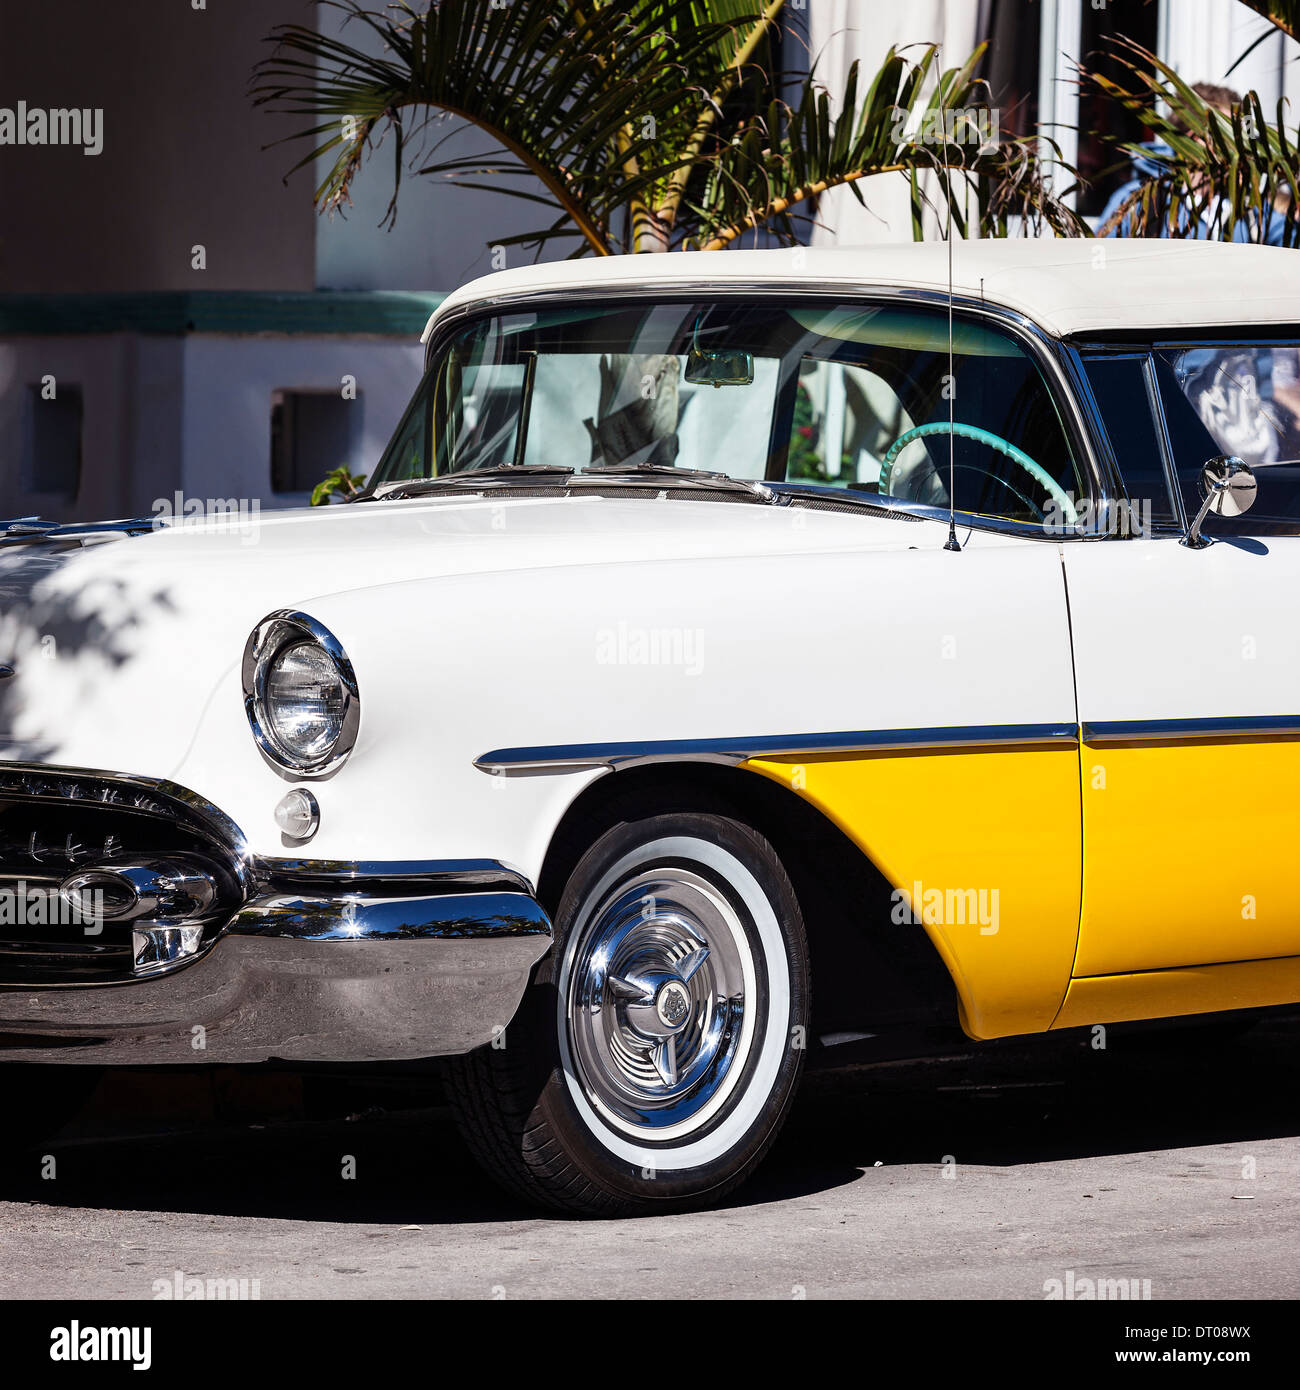 Old white and yellow car in the street Stock Photo